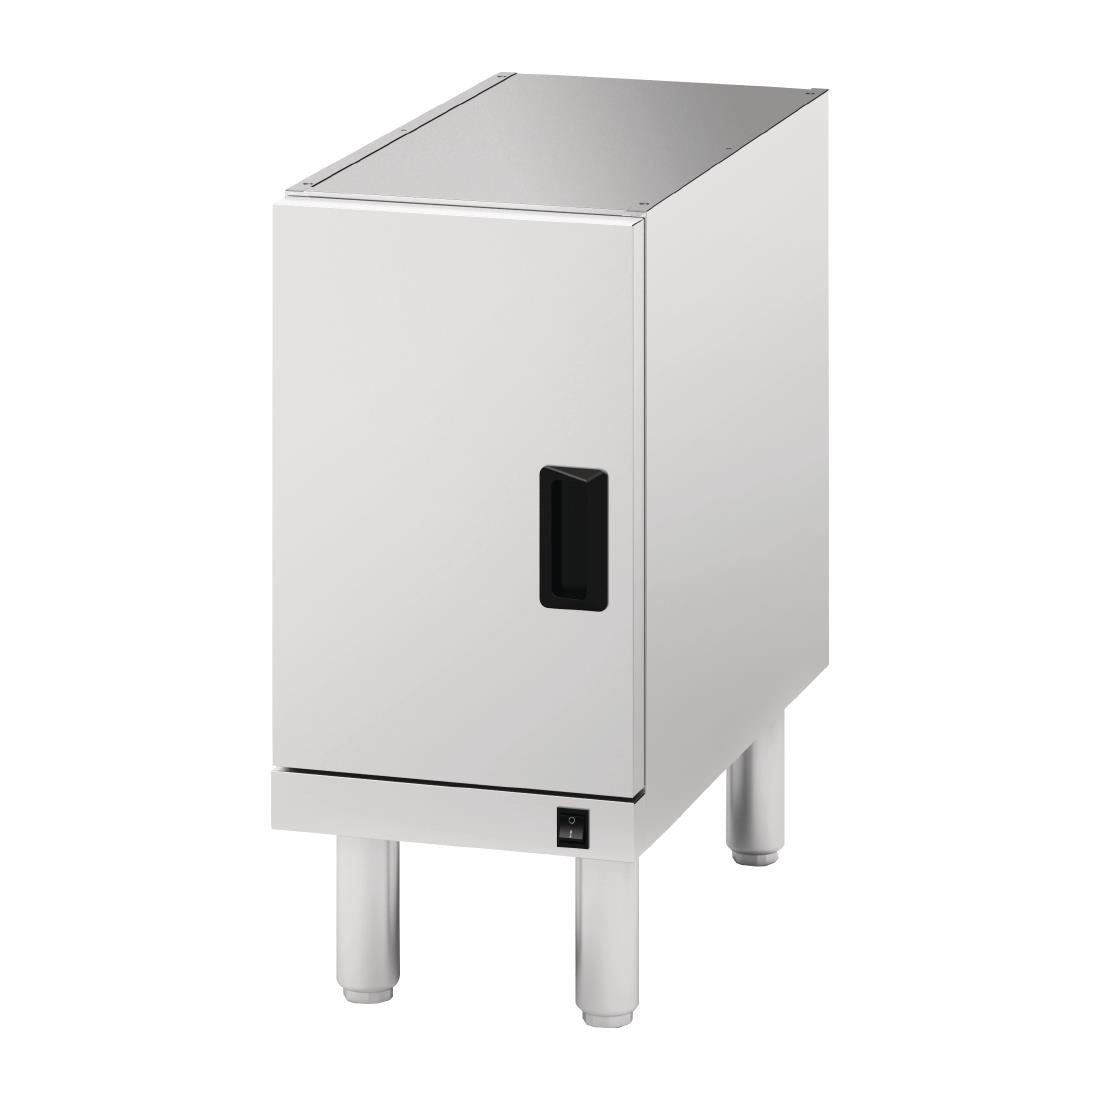 E371 Lincat Silverlink 600 Heated Pedestal With Top, Legs and Doors HCL3 JD Catering Equipment Solutions Ltd